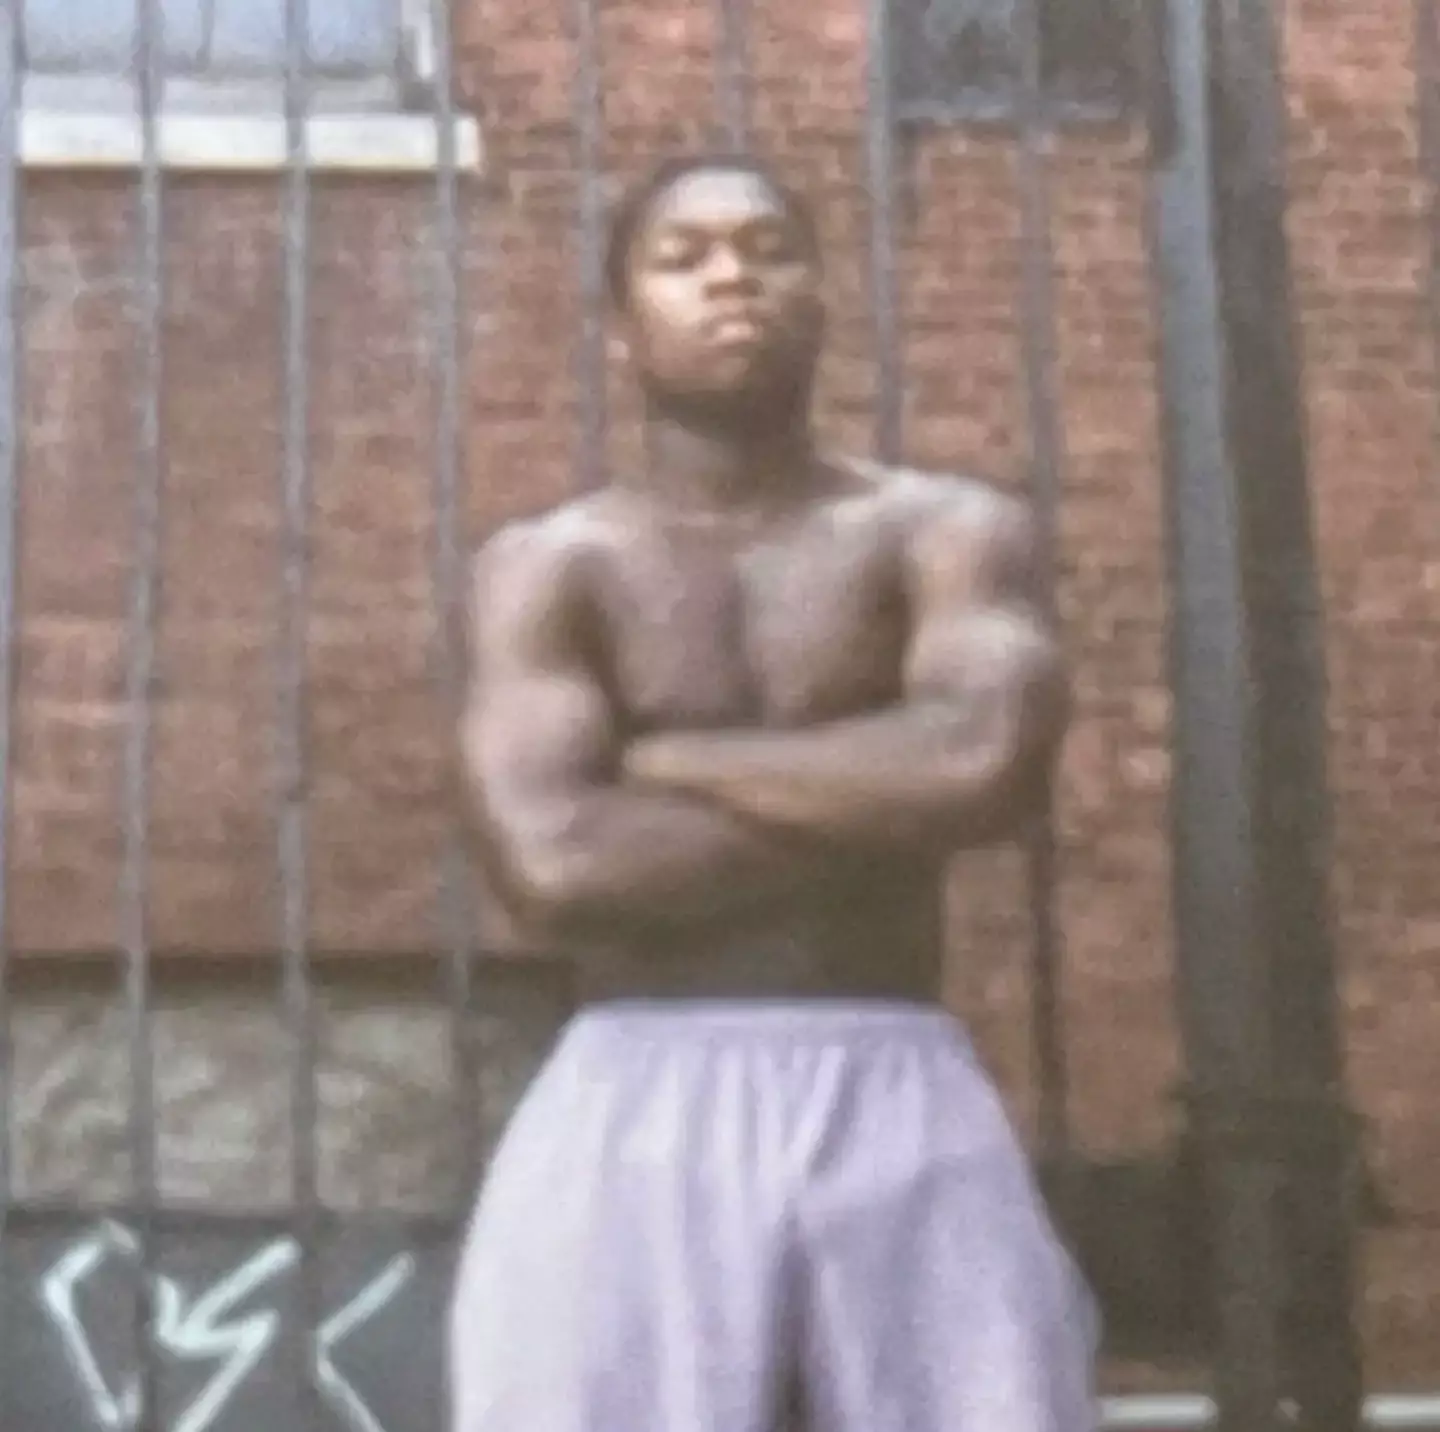 50 Cent at age 15.